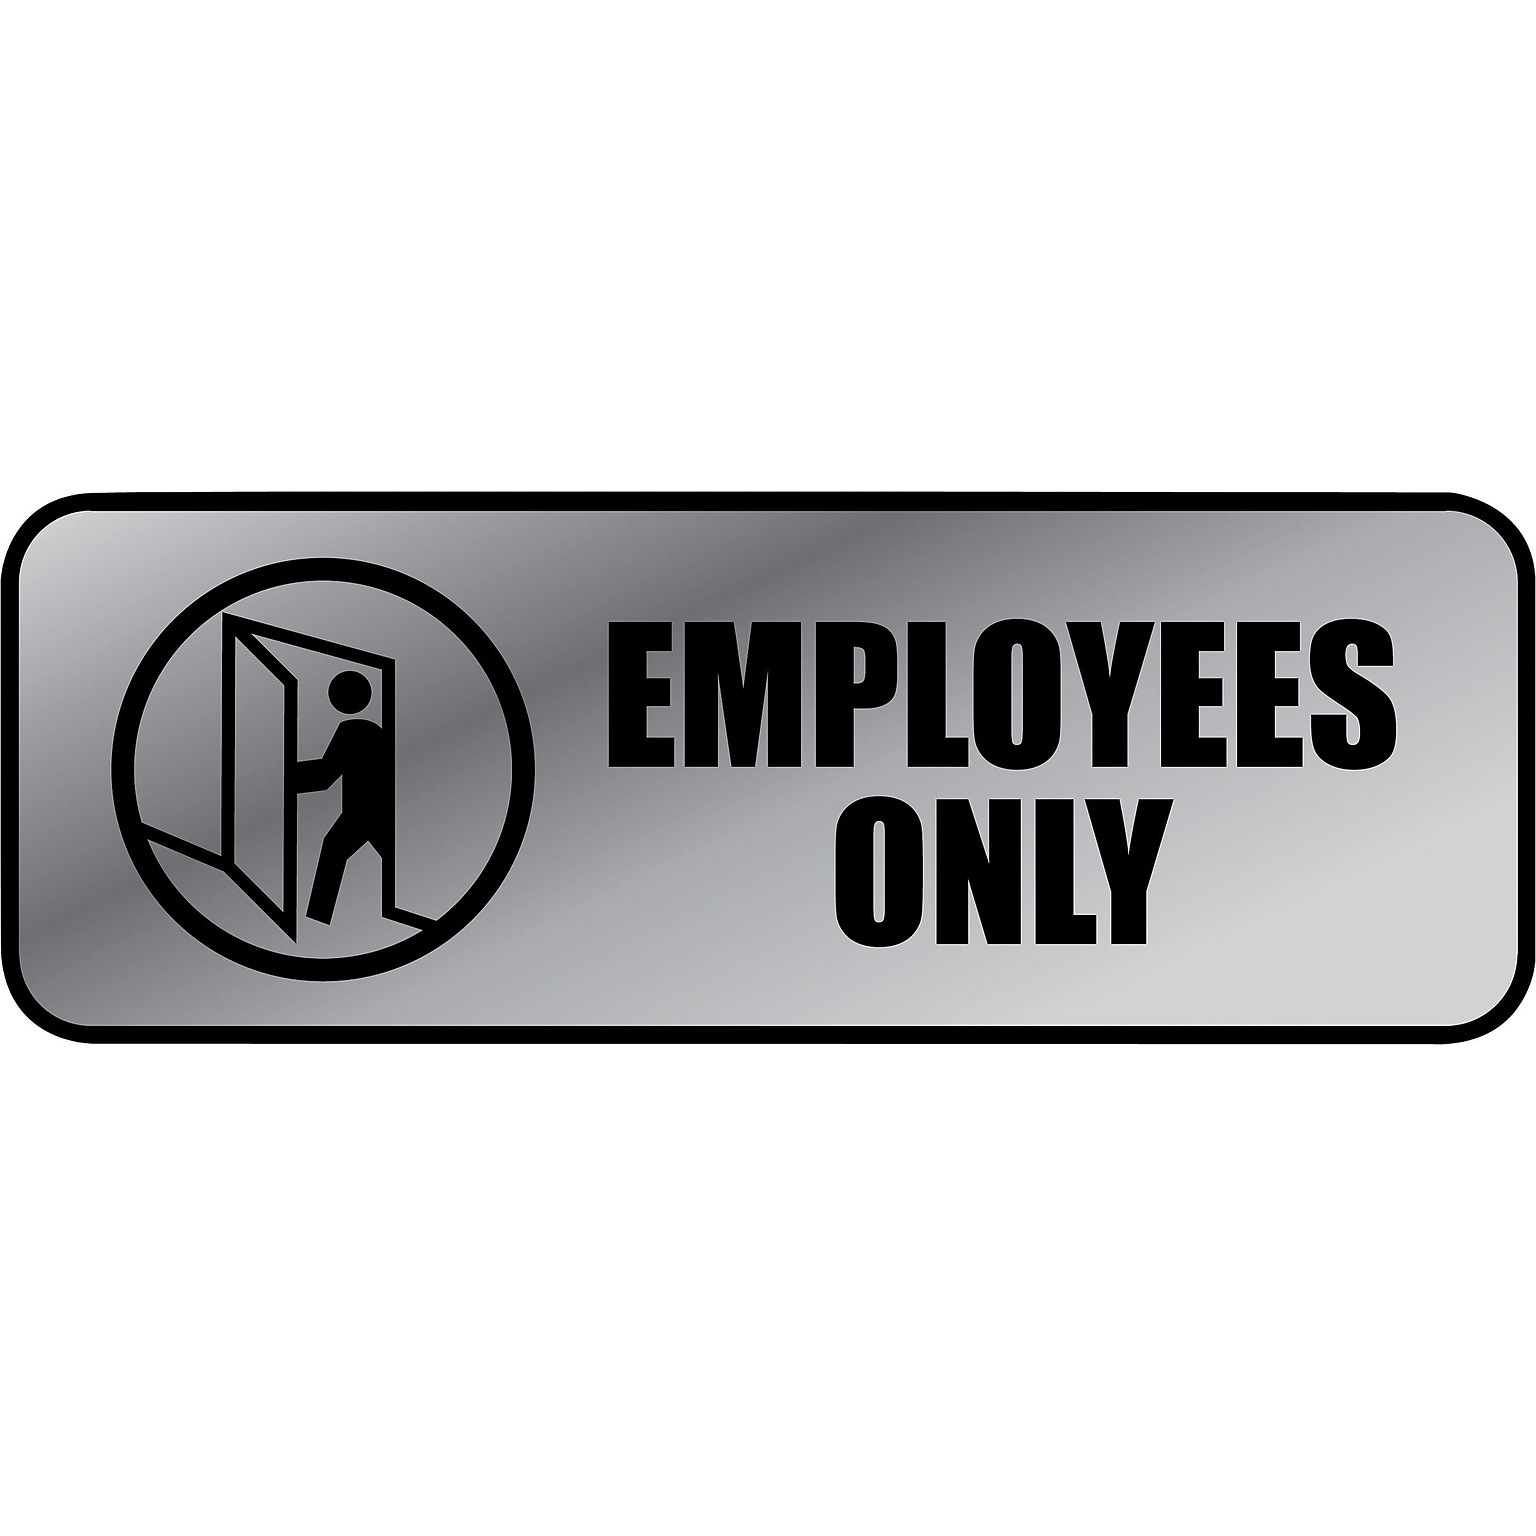 Cosco Employees Only Indoor Wall Sign, 9.2L x 3.5H, Gray/Black (098206)